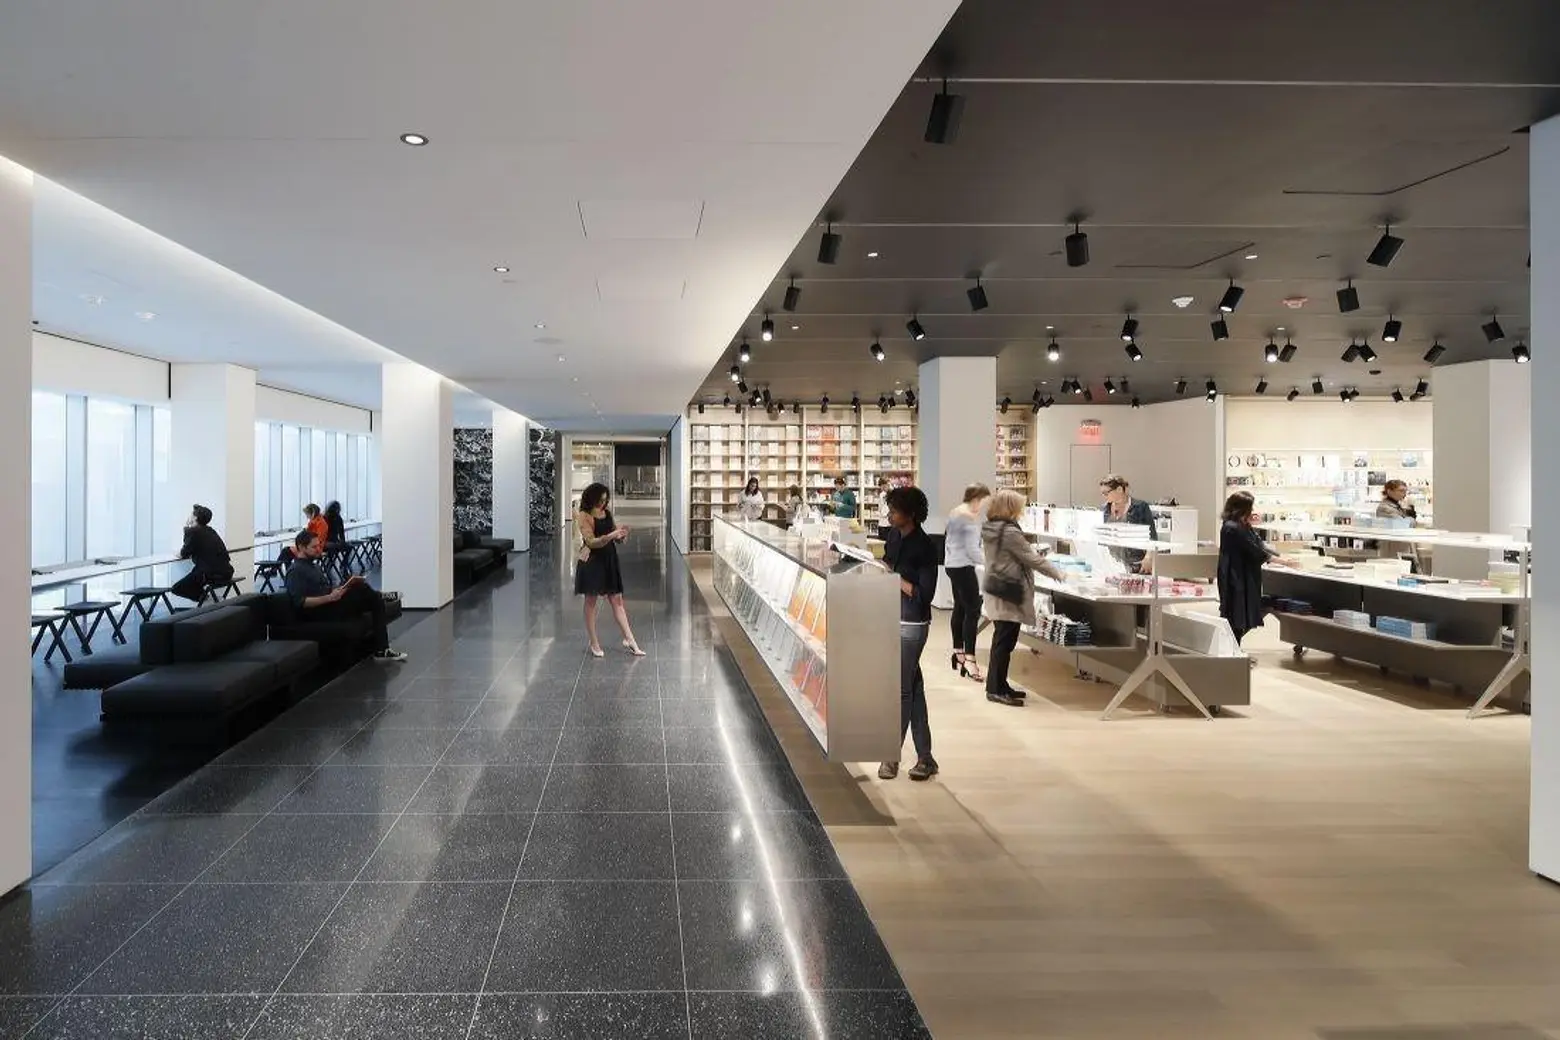 MoMA scales back expansion by Diller Scofidio + Renfro